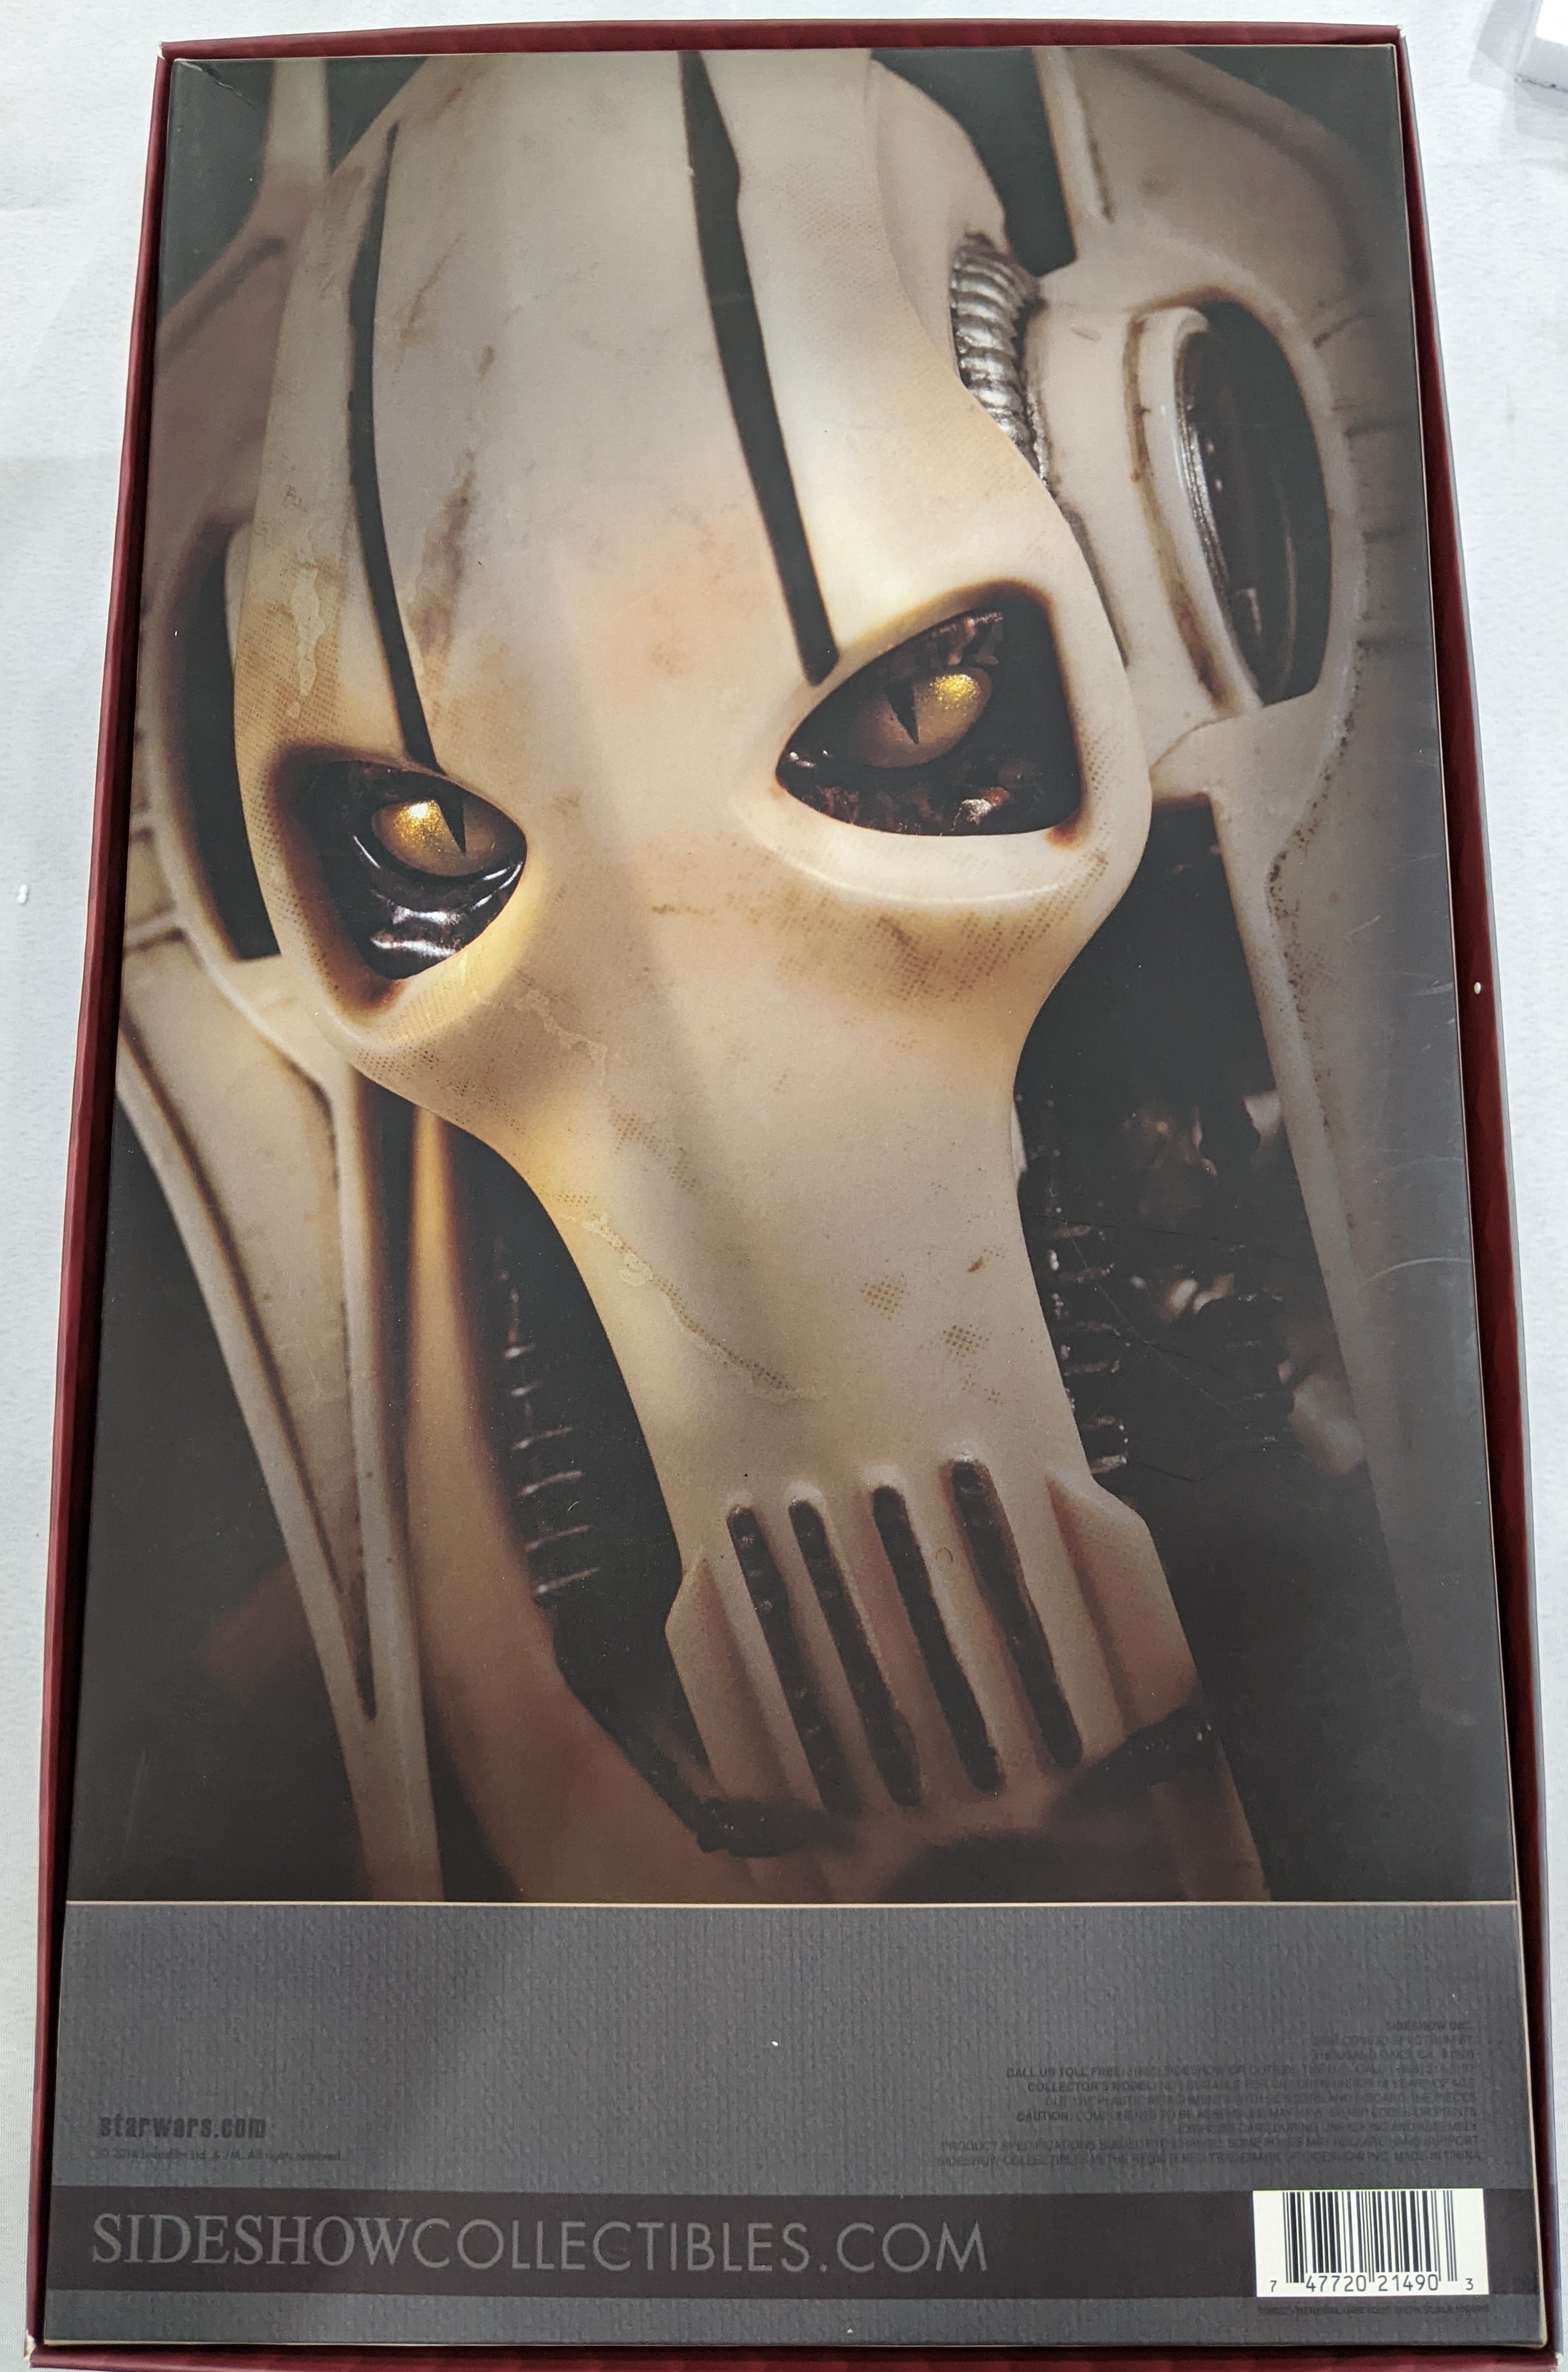 Sideshow Collectible 1/6 Star Wars General Grievous Sixth Scale Figure *Open Box*